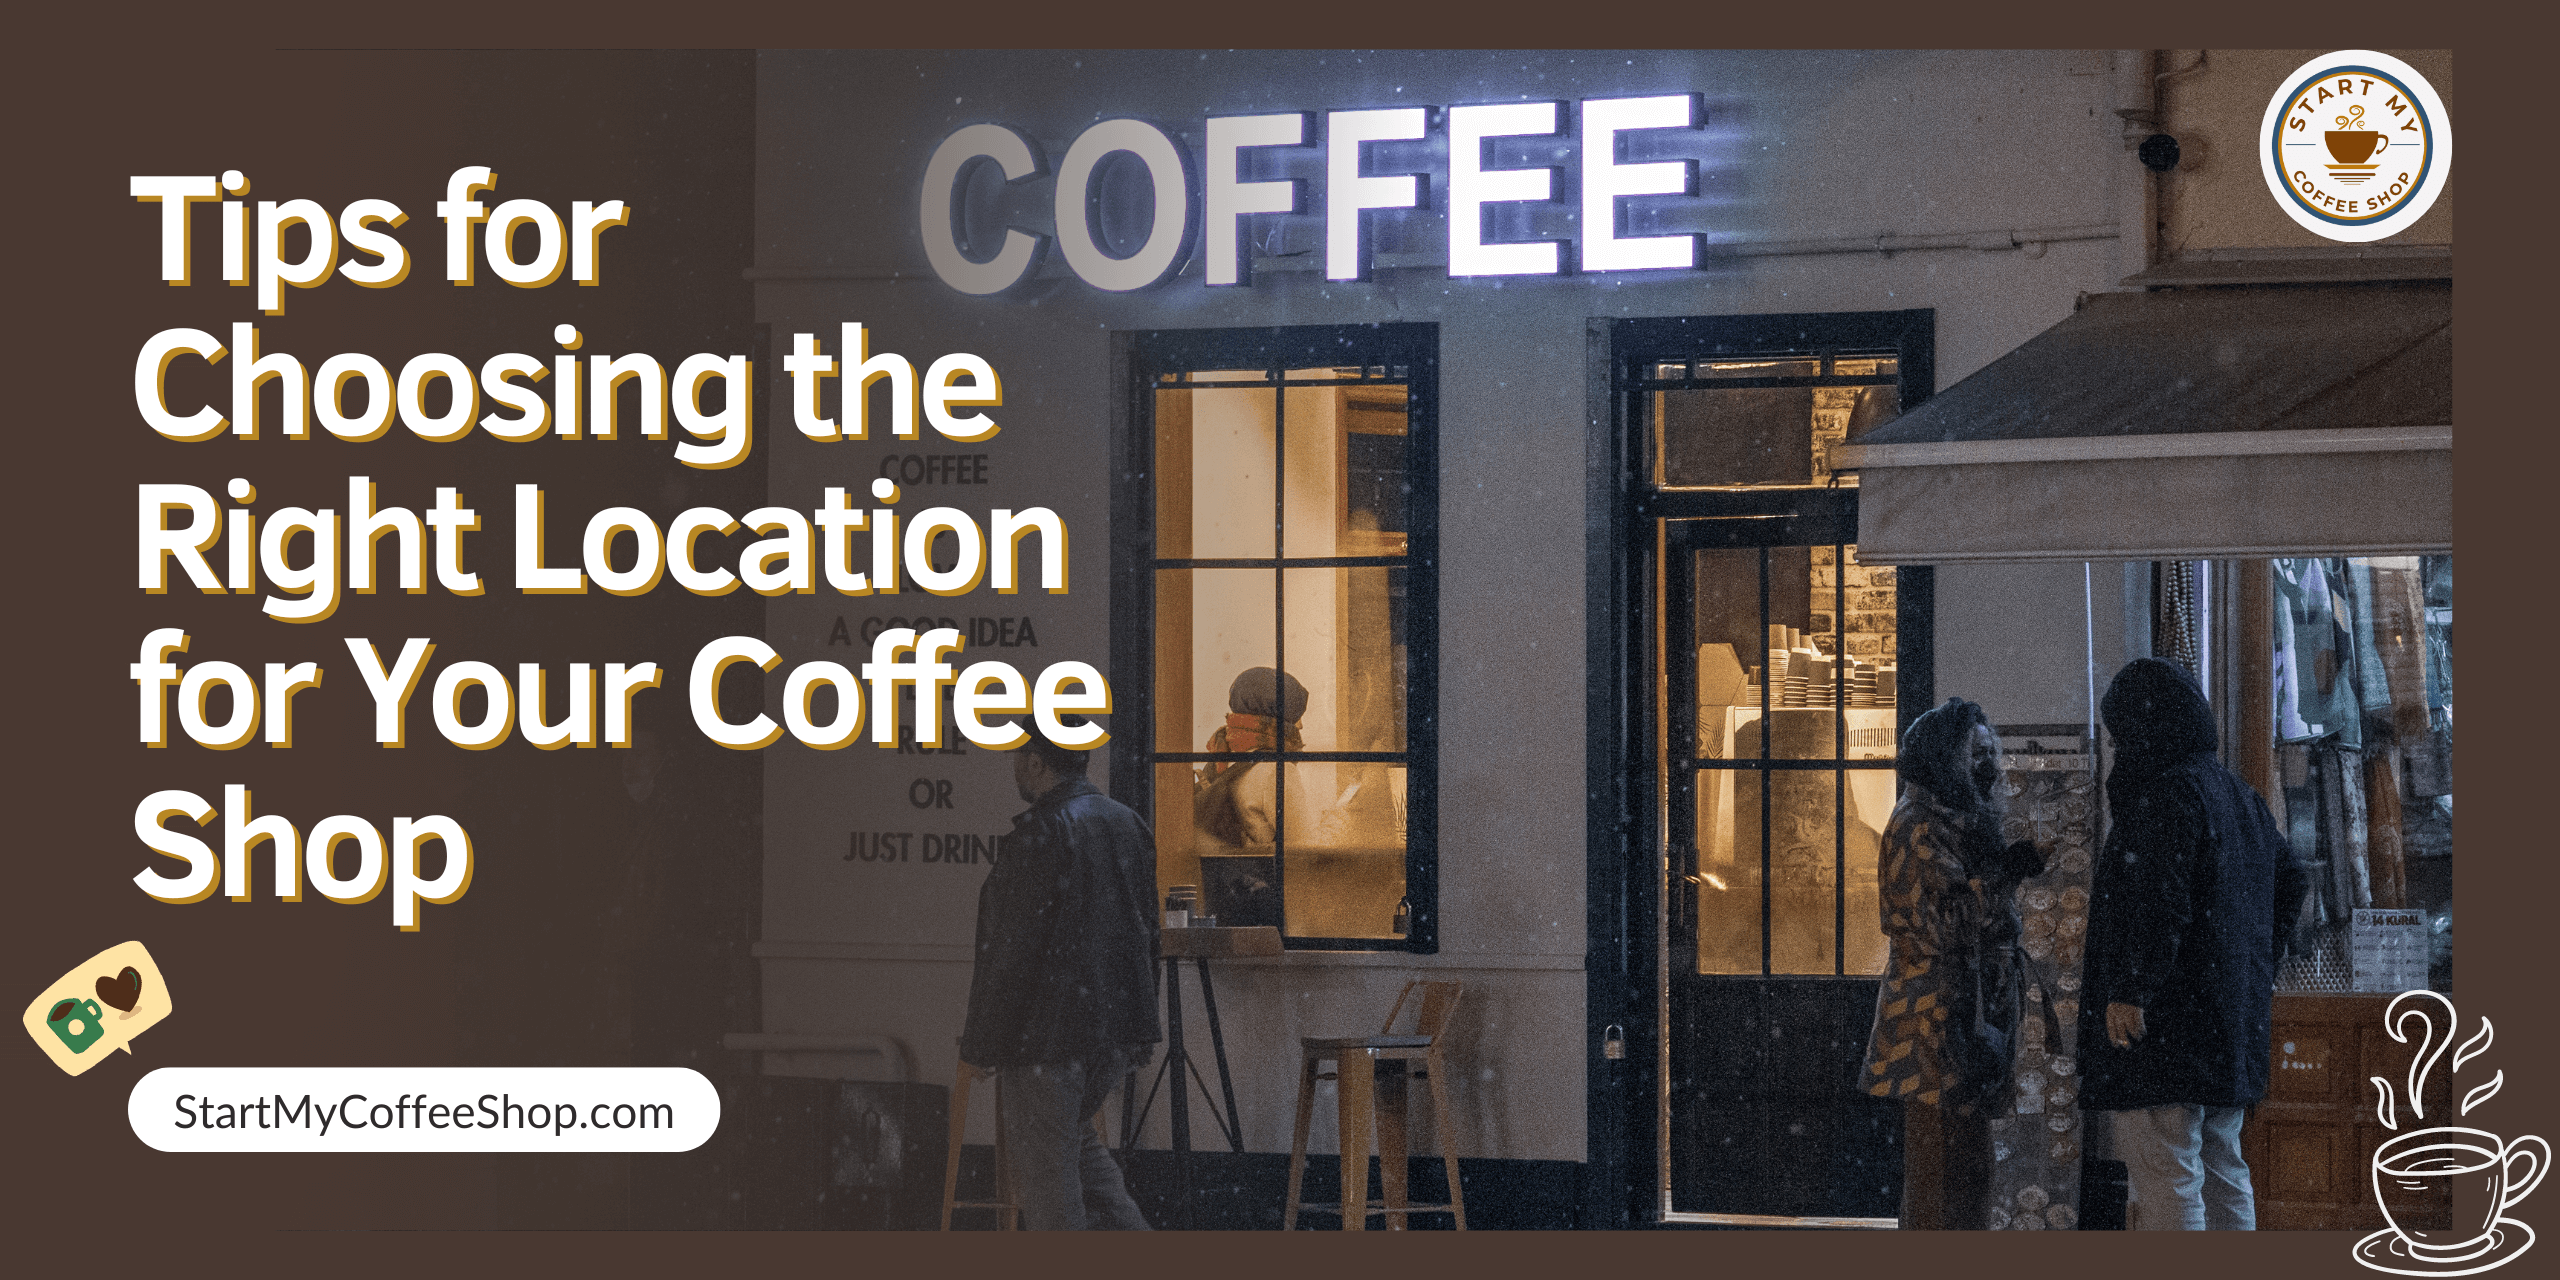 business plan coffee shop introduction